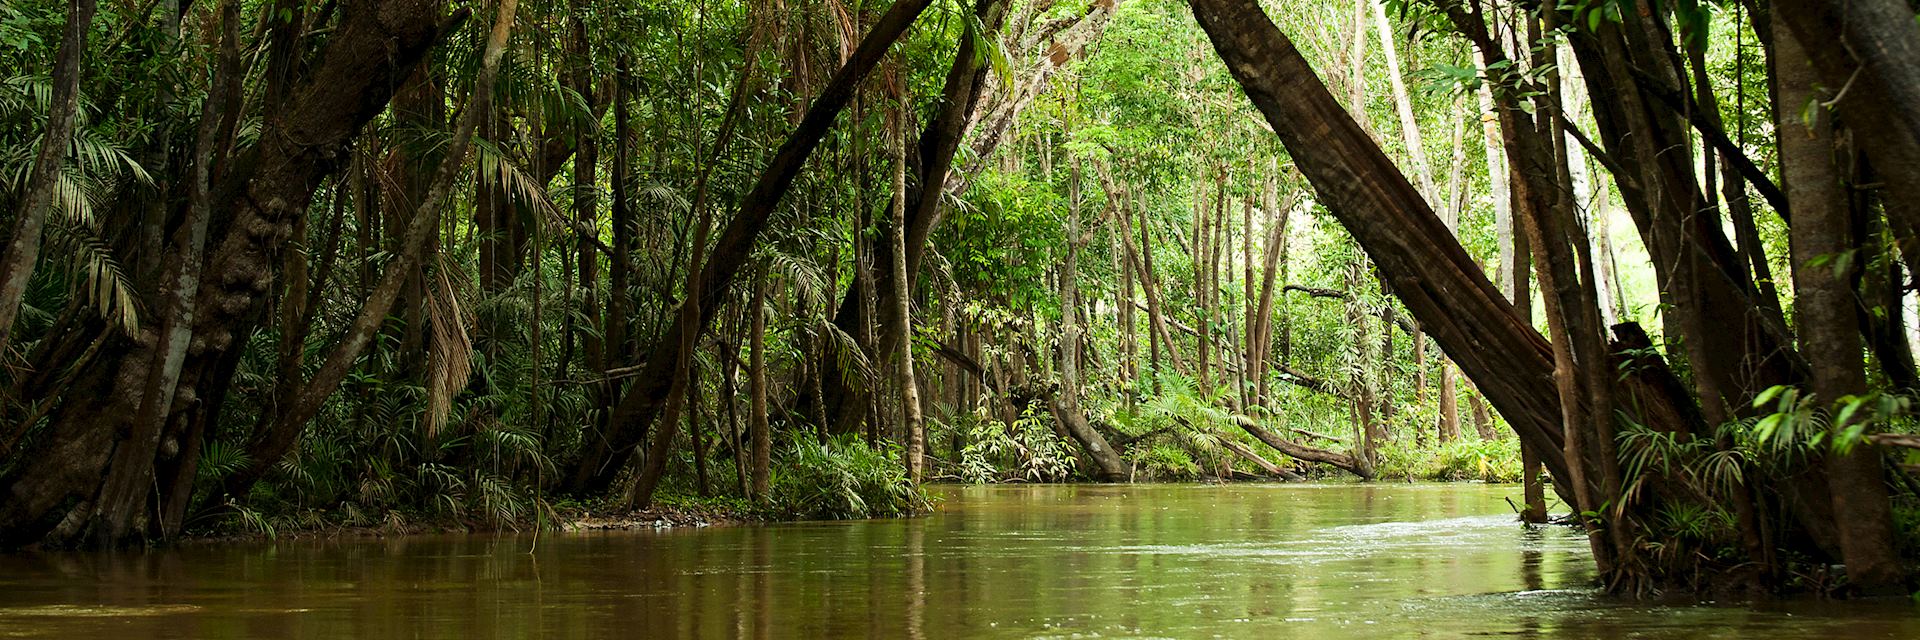 When Is The Best Time To Visit The  Rainforest In Brazil? - Rainforest  Cruises